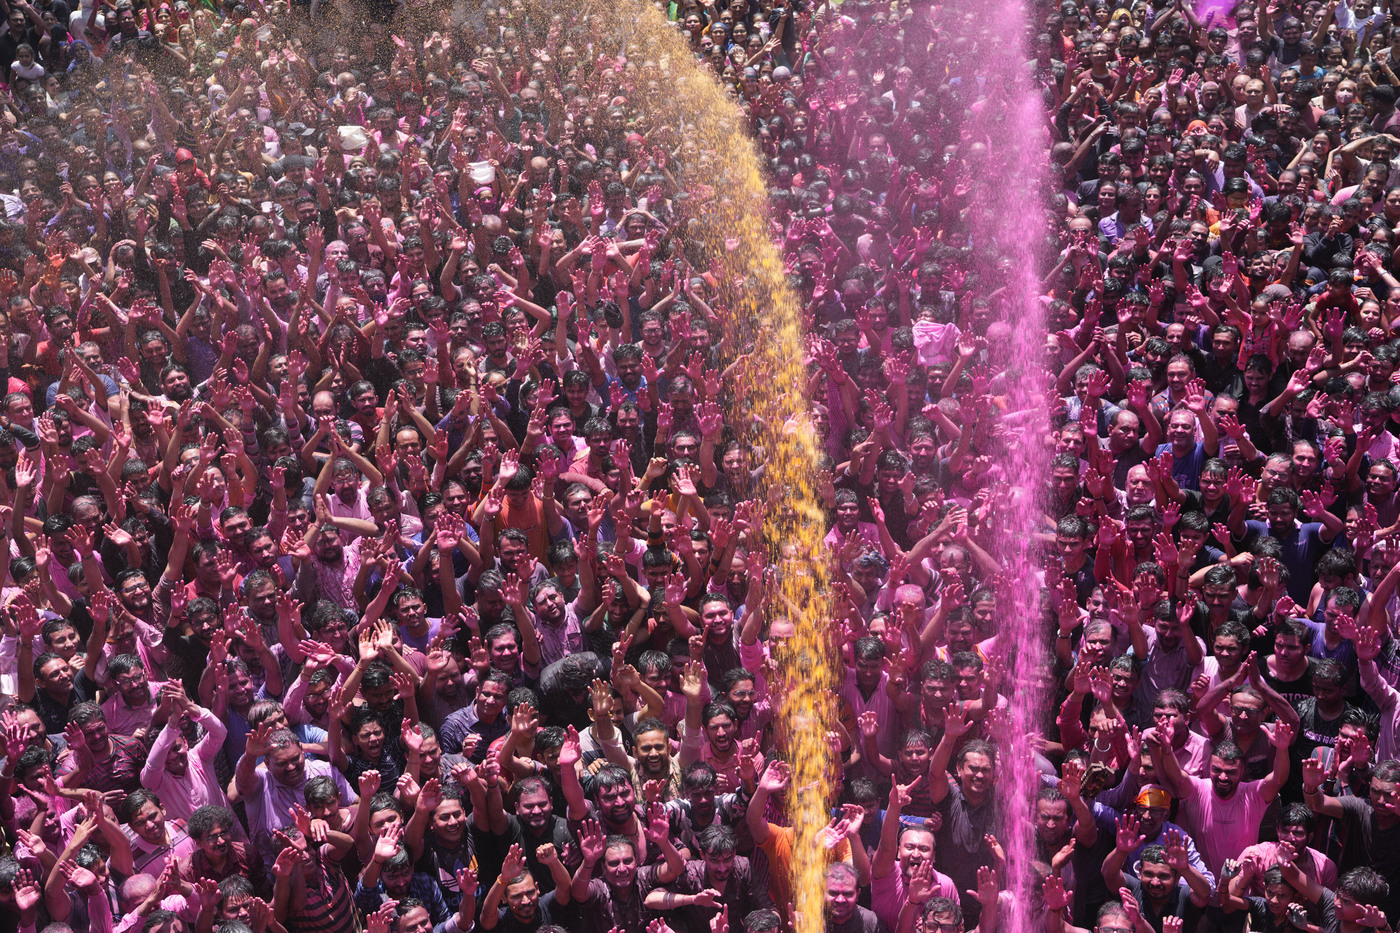 Devotees cheer as colored powder and water is sprayed on them during celebrations marking Holi at the Kalupur Swaminarayan temple in Ahmedabad, India, Friday, March 18, 2022. Holi, the Hindu festival of colors, also marks the advent of spring. (AP Photo/Ajit Solanki)